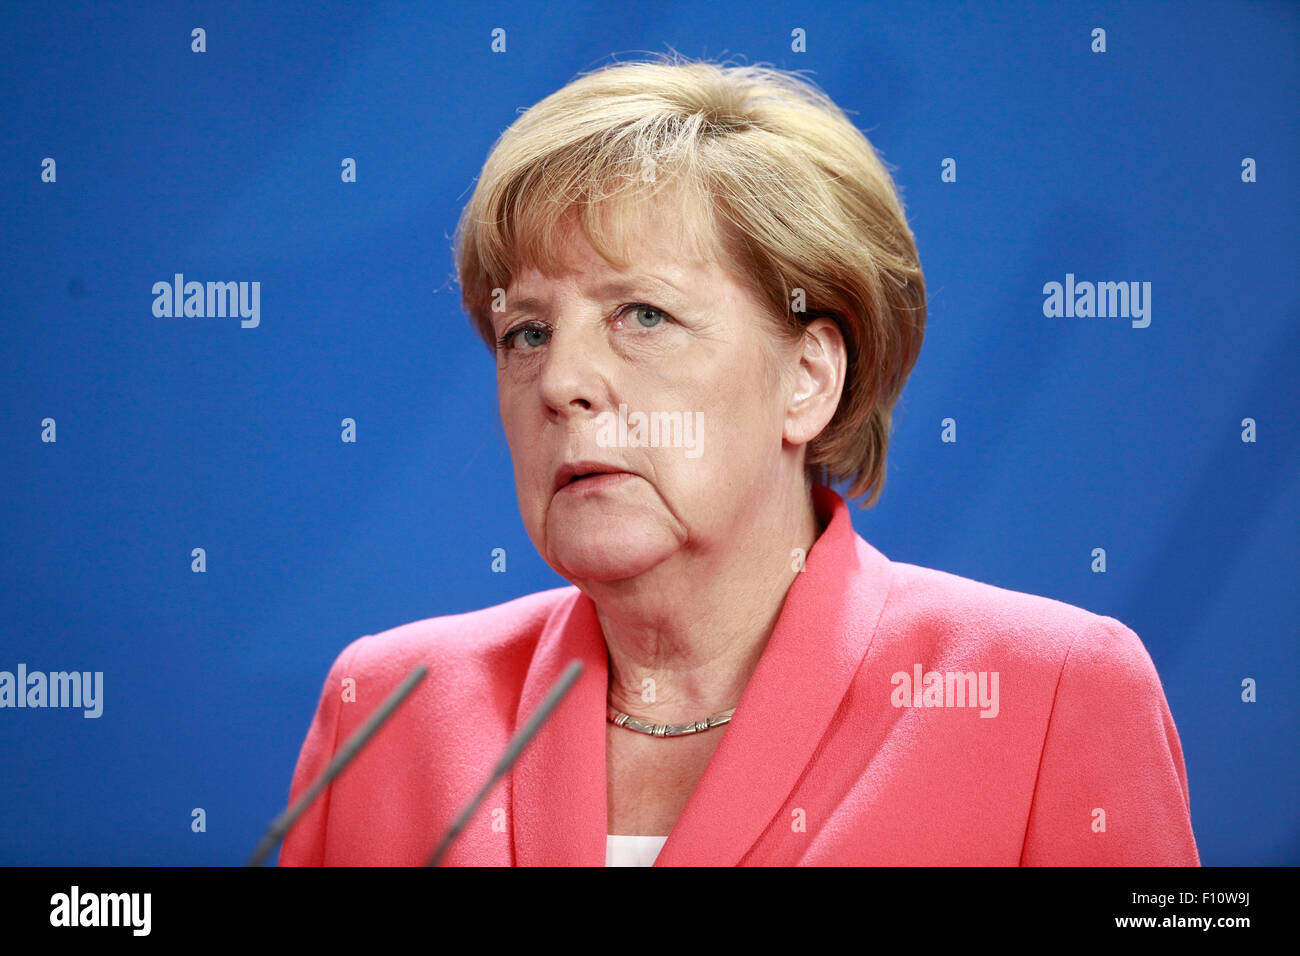 Berlin, Germany. 24th Aug, 2015. German Chancellor Angela Merkel, French president François Hollande and Ukrainian president Petro Poroschenko give a joint press conference after meeting at the German Chancellery in Berlin Germany on 24 August 2015. / Picture: Angela Merkel, German Chancellor Credit:  Reynaldo Chaib Paganelli/Alamy Live News Stock Photo